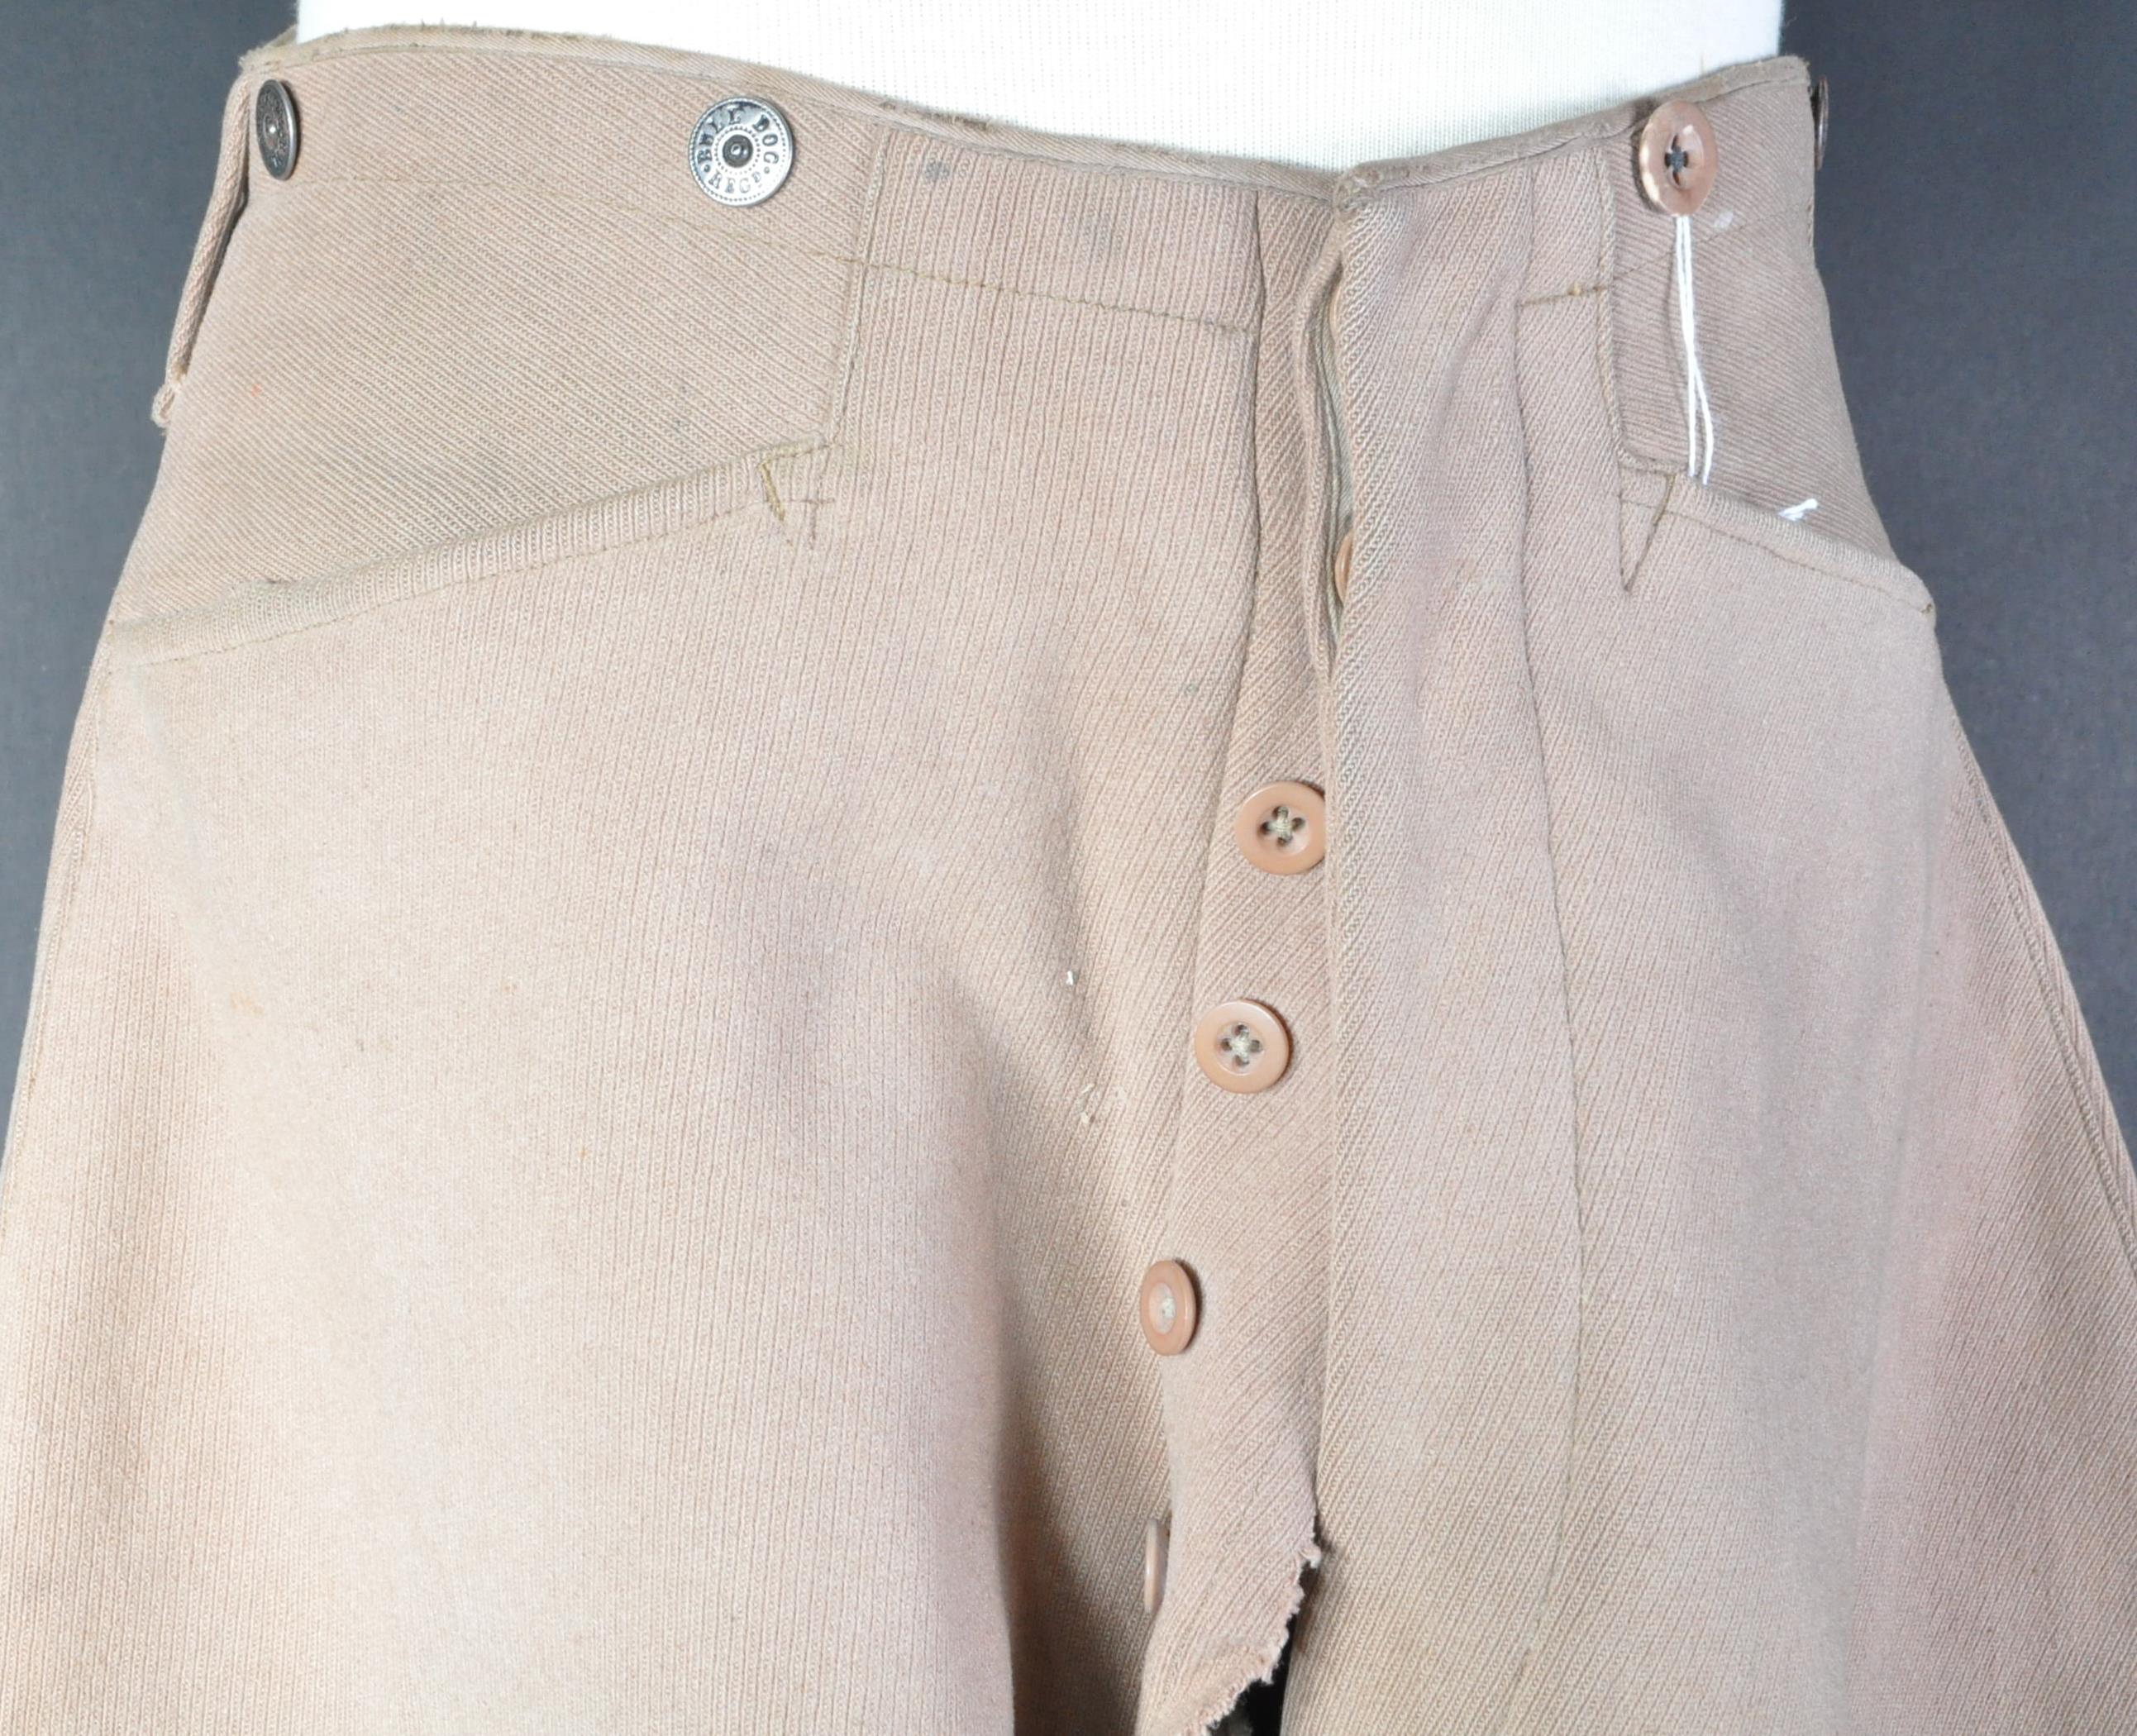 WWII SECOND WORLD WAR MILITARY BREECHES / TROUSERS - Image 4 of 8